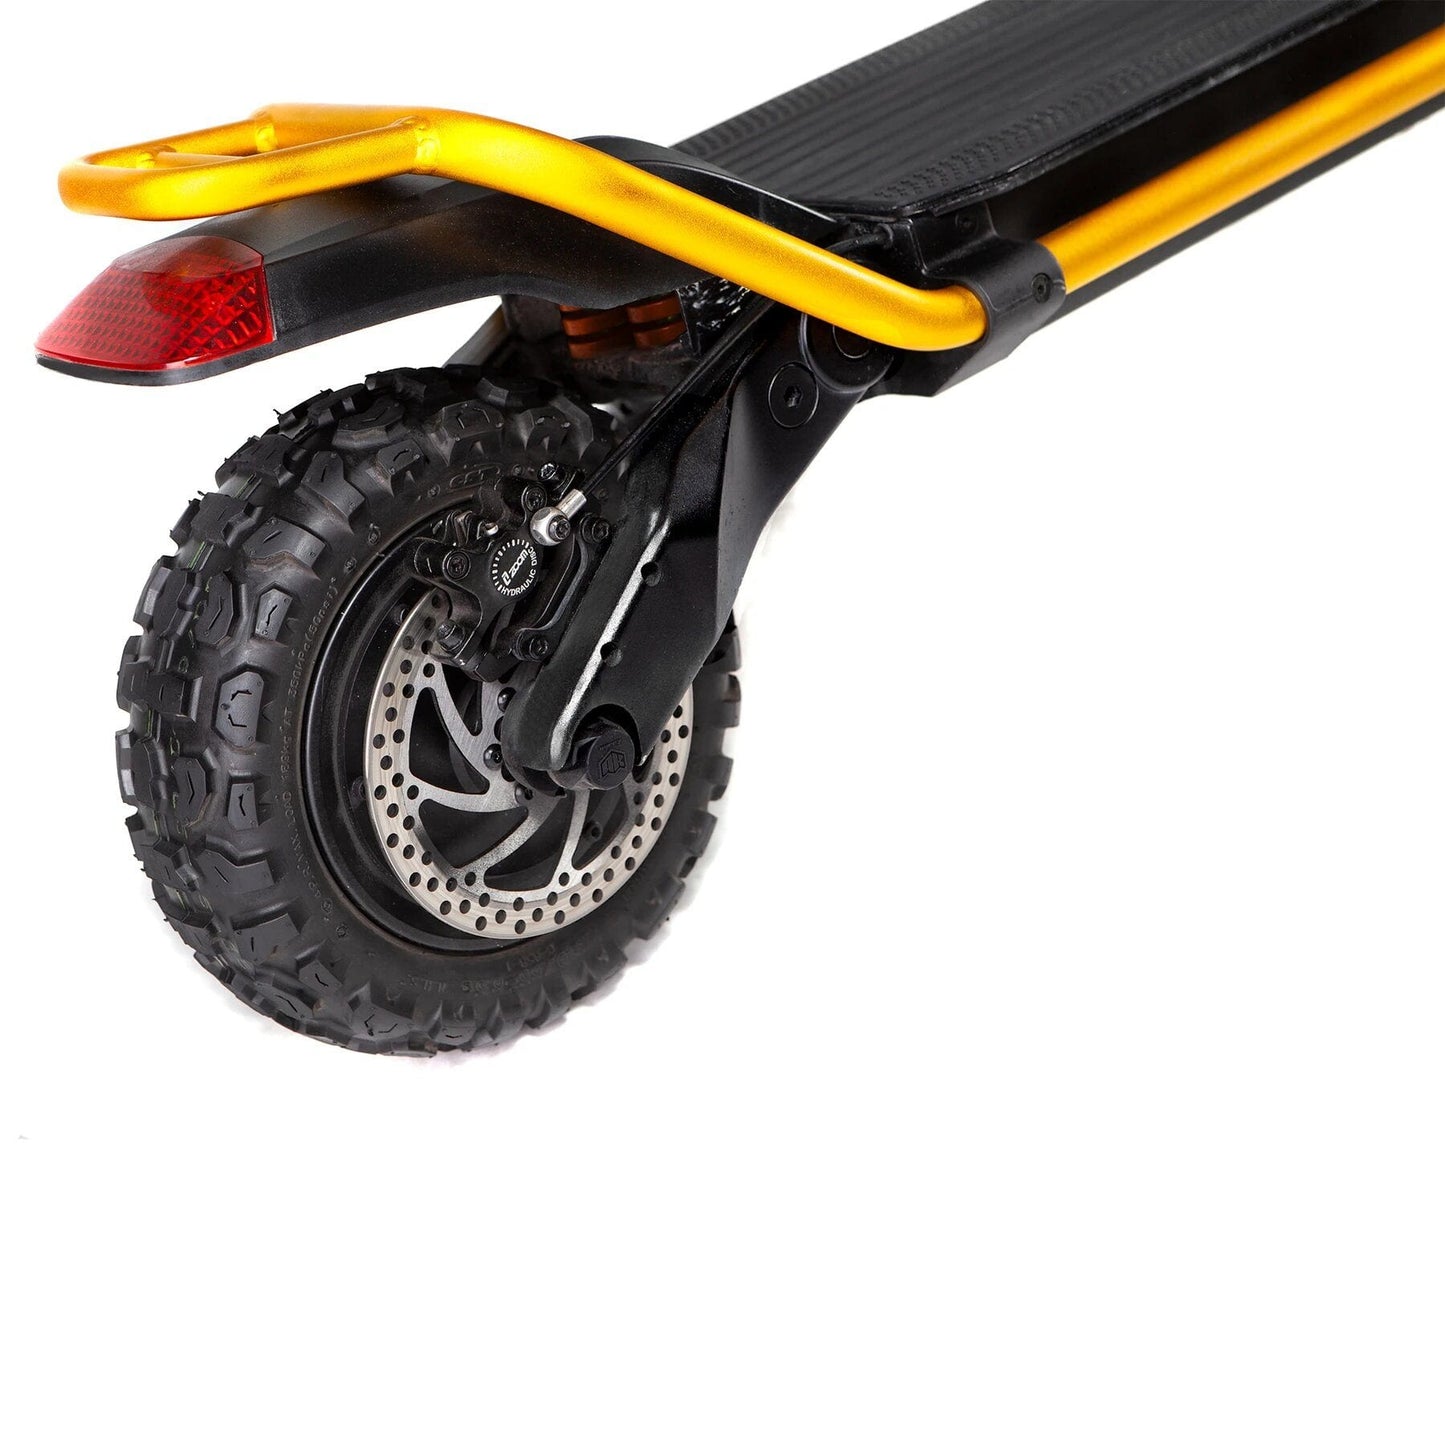 kaabo wolf king electric scooter gold rear wheel